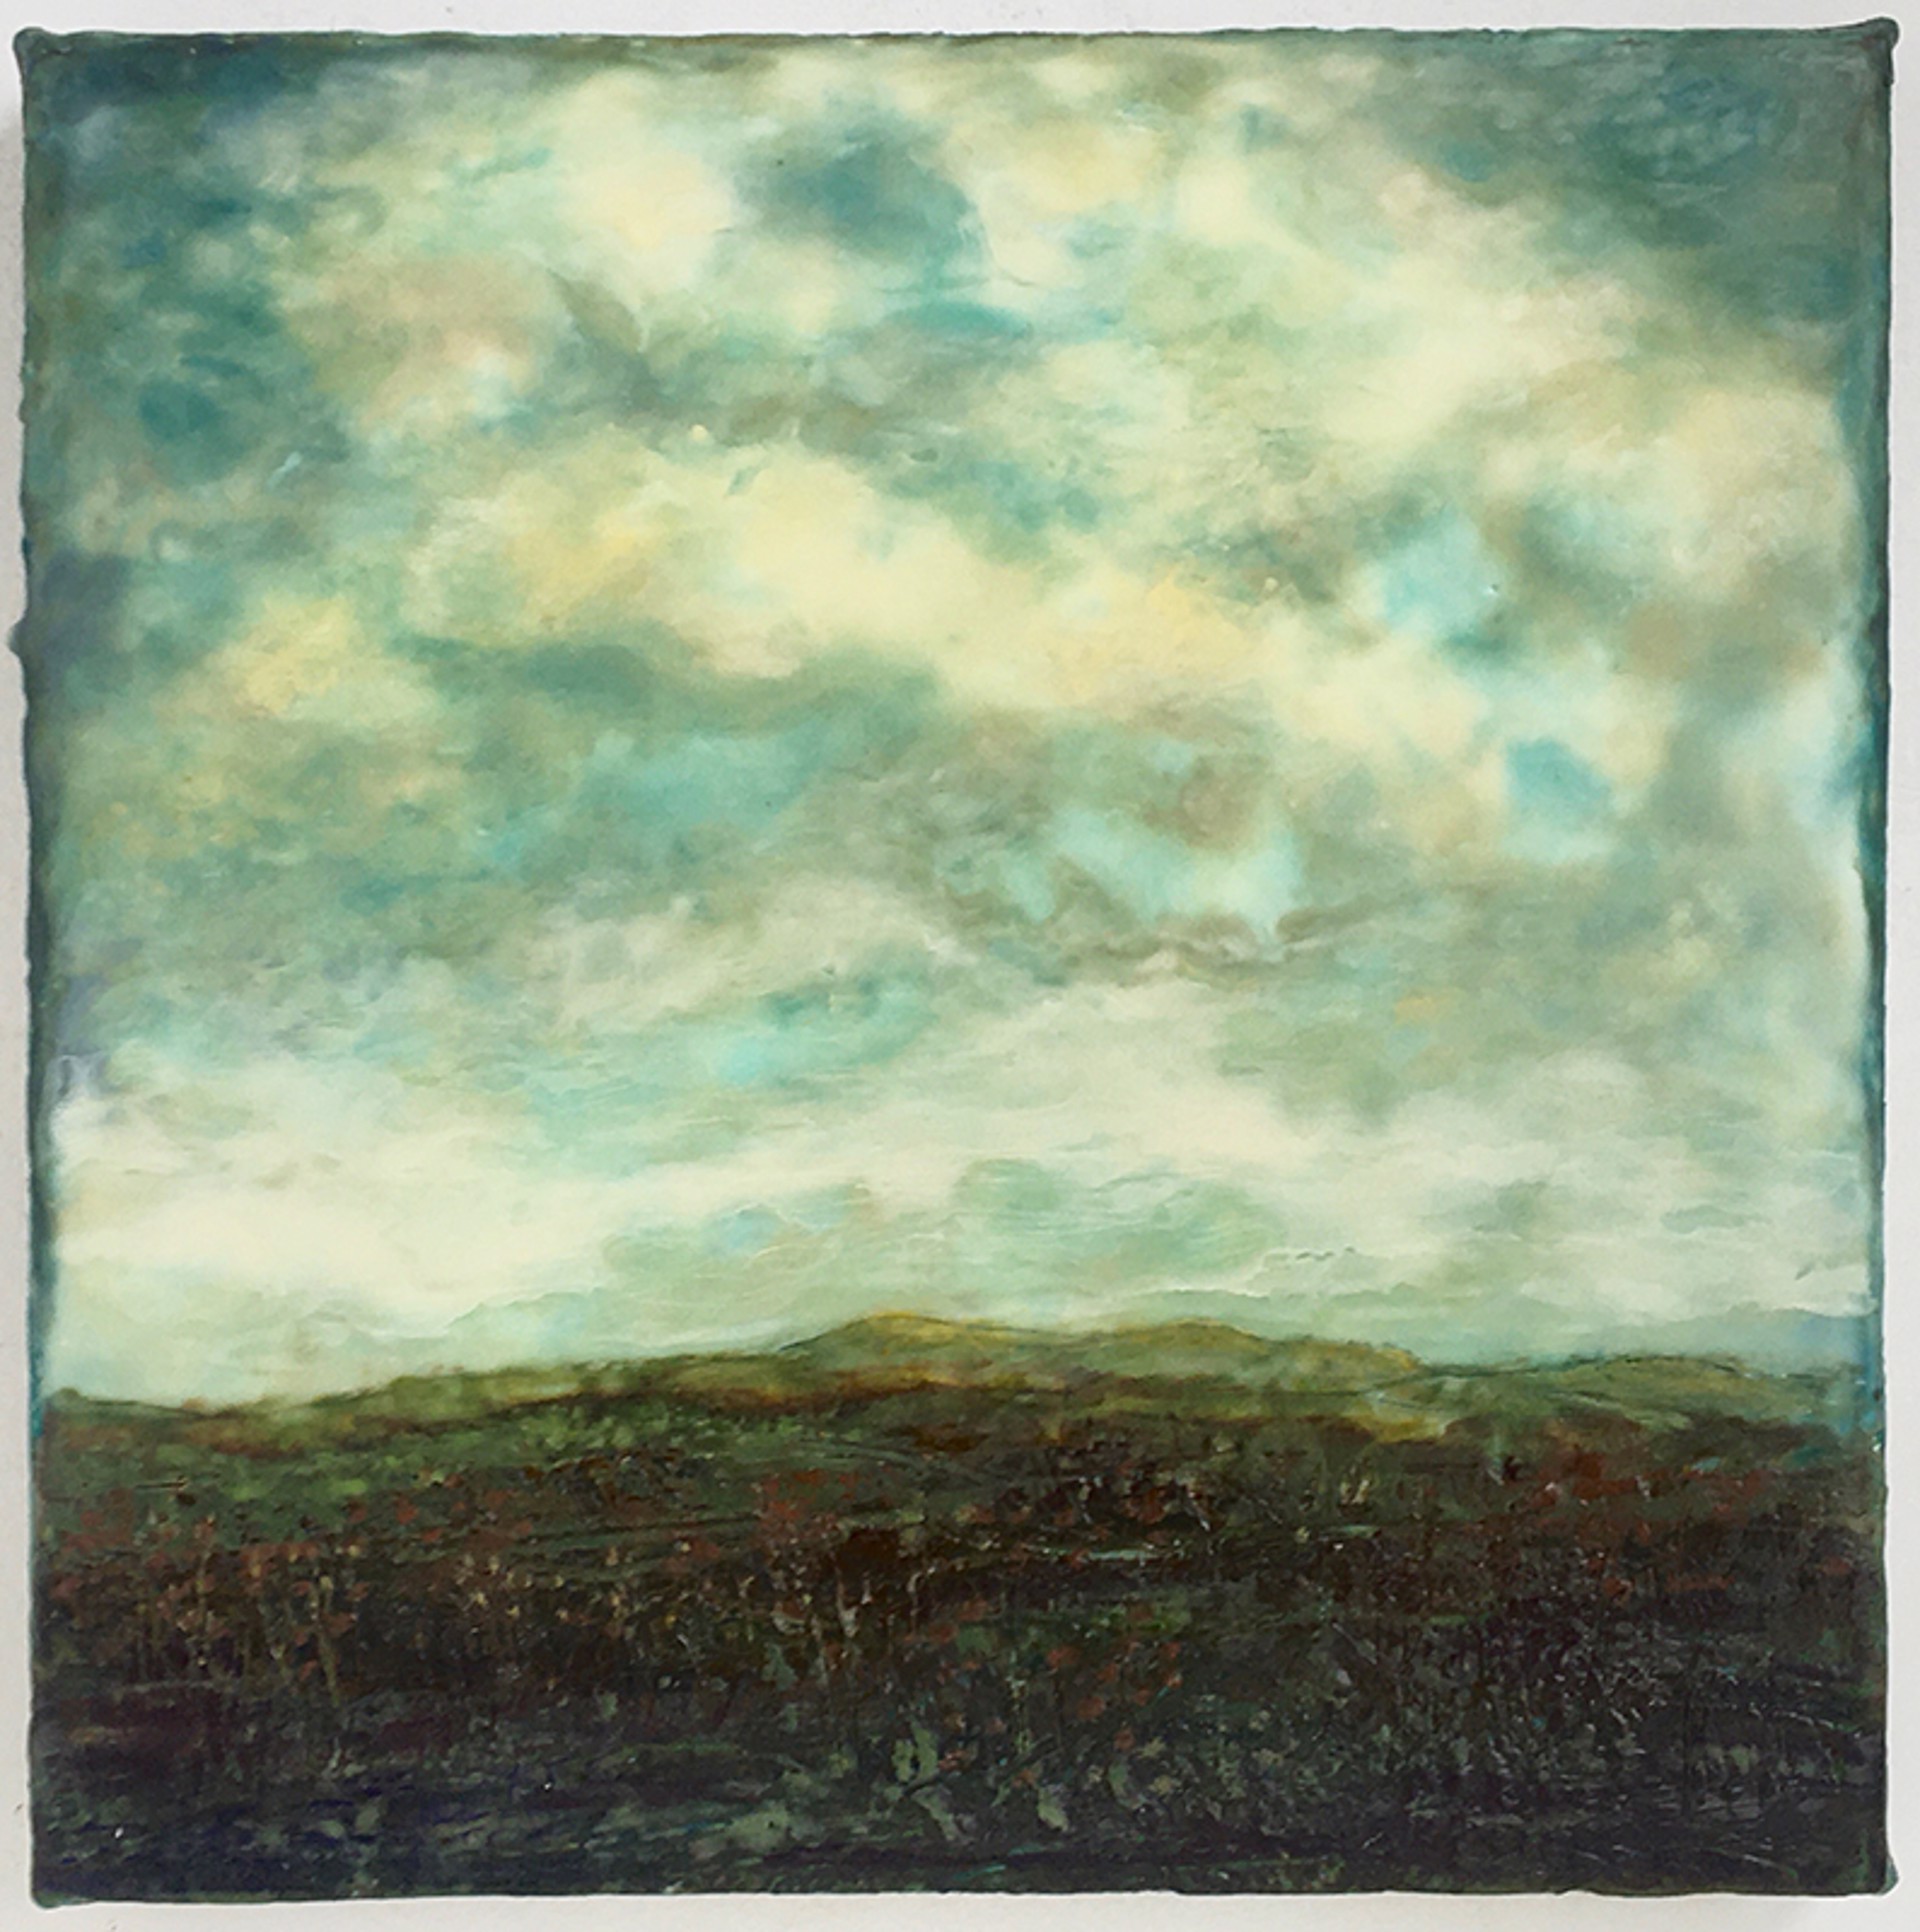 Untitled Landscape No. 4 by Leigh Palmer